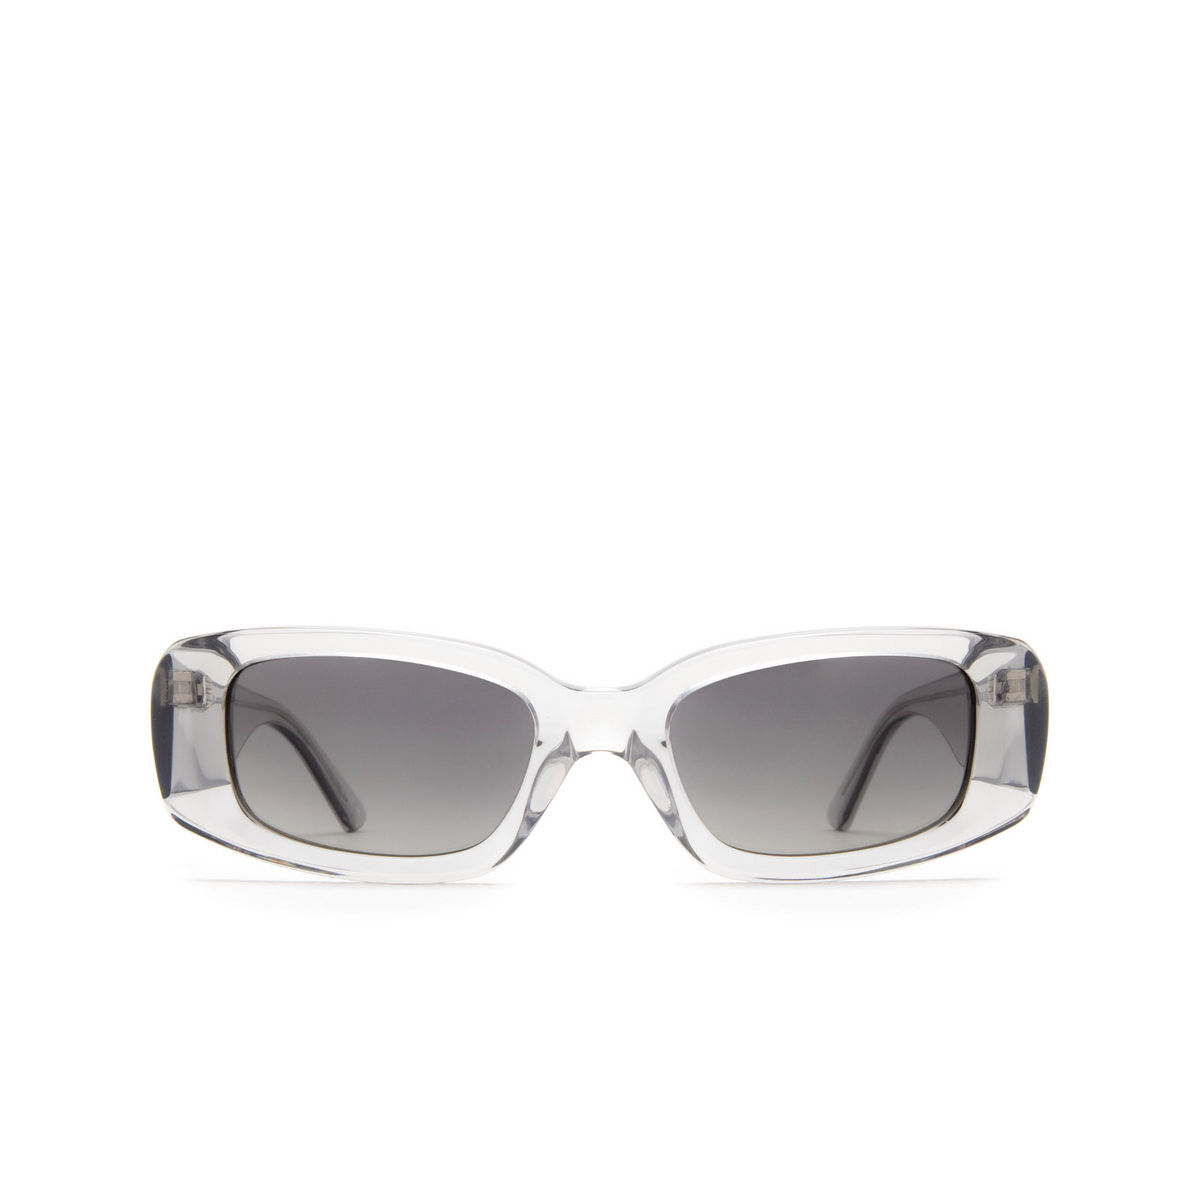 Chimi 10 Sunglasses GREY - front view